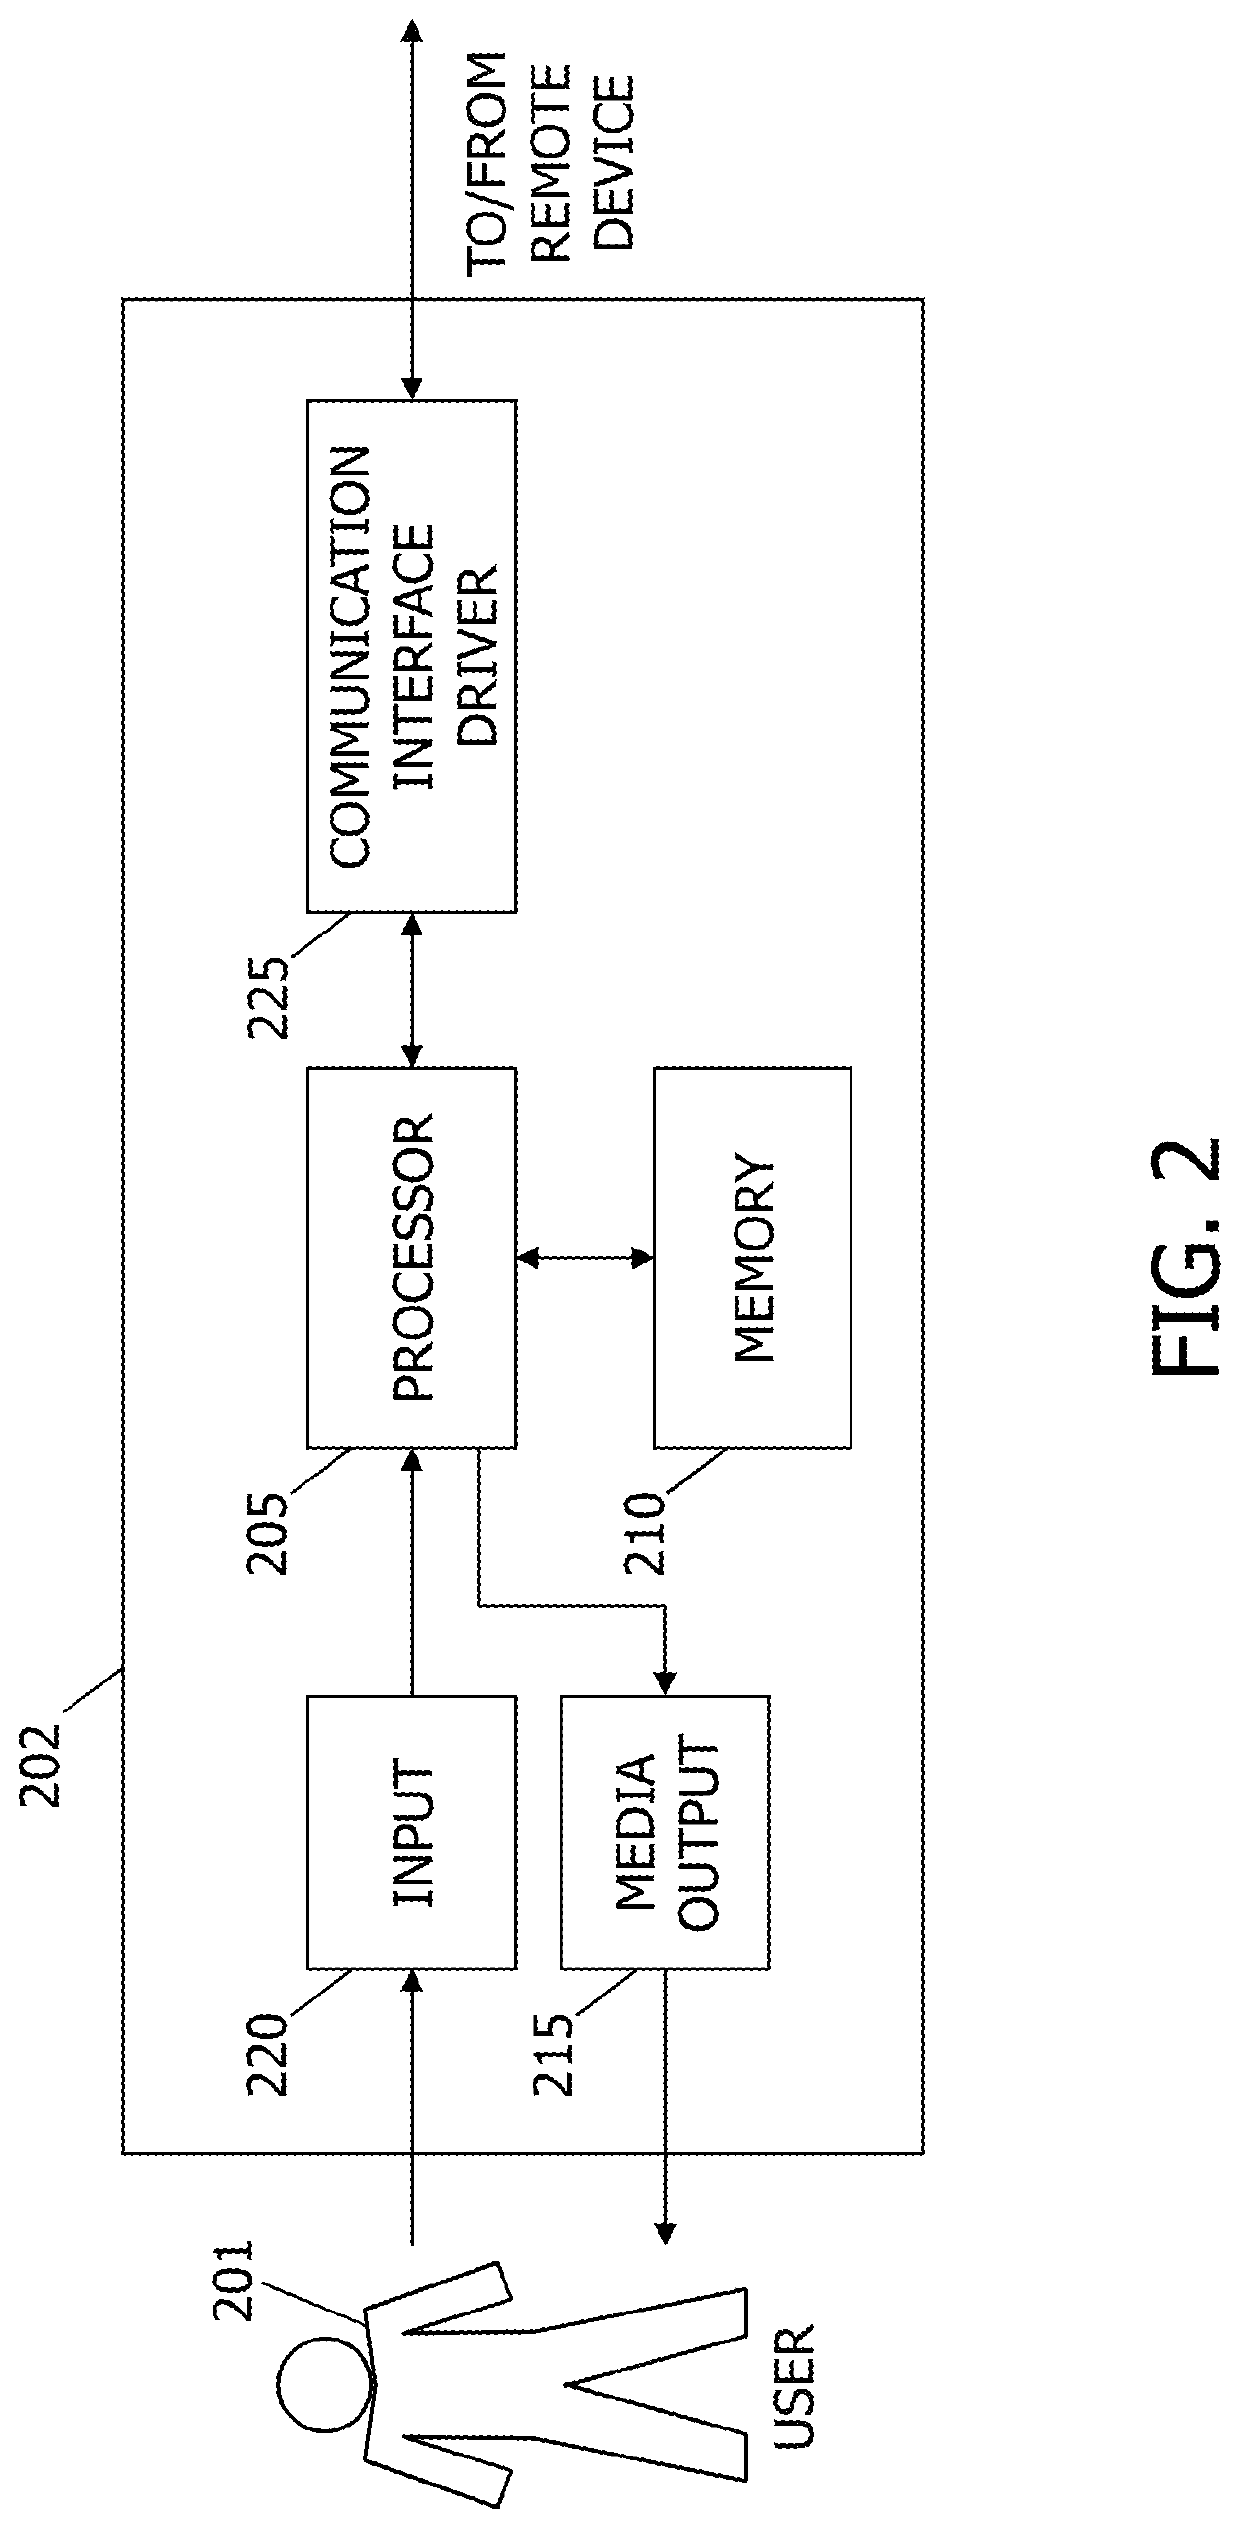 Systems and methods for dynamically commissioning and decommissioning computer components